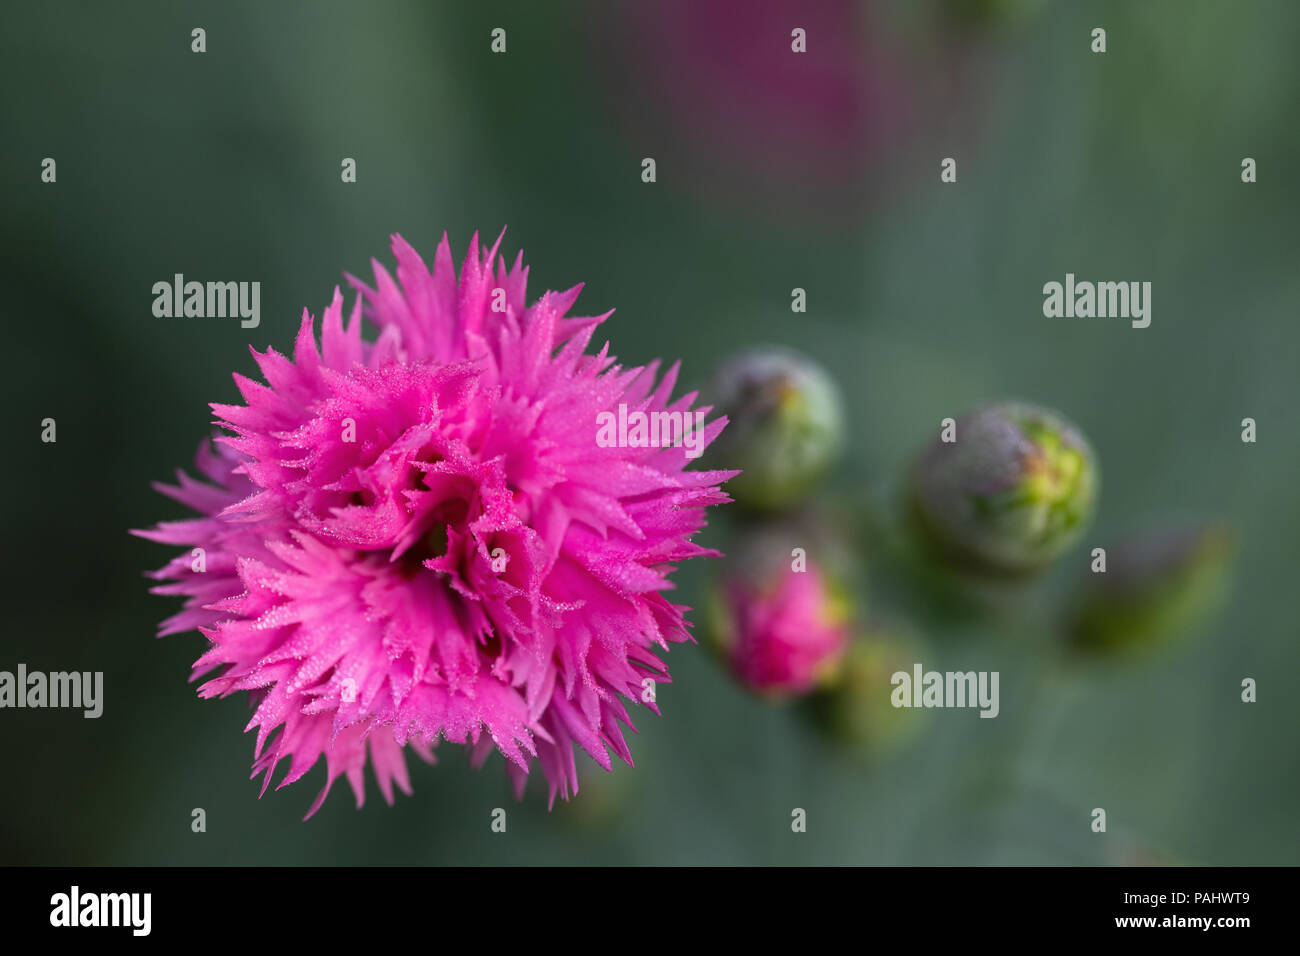 Macro image of a Dianthus flower Stock Photo